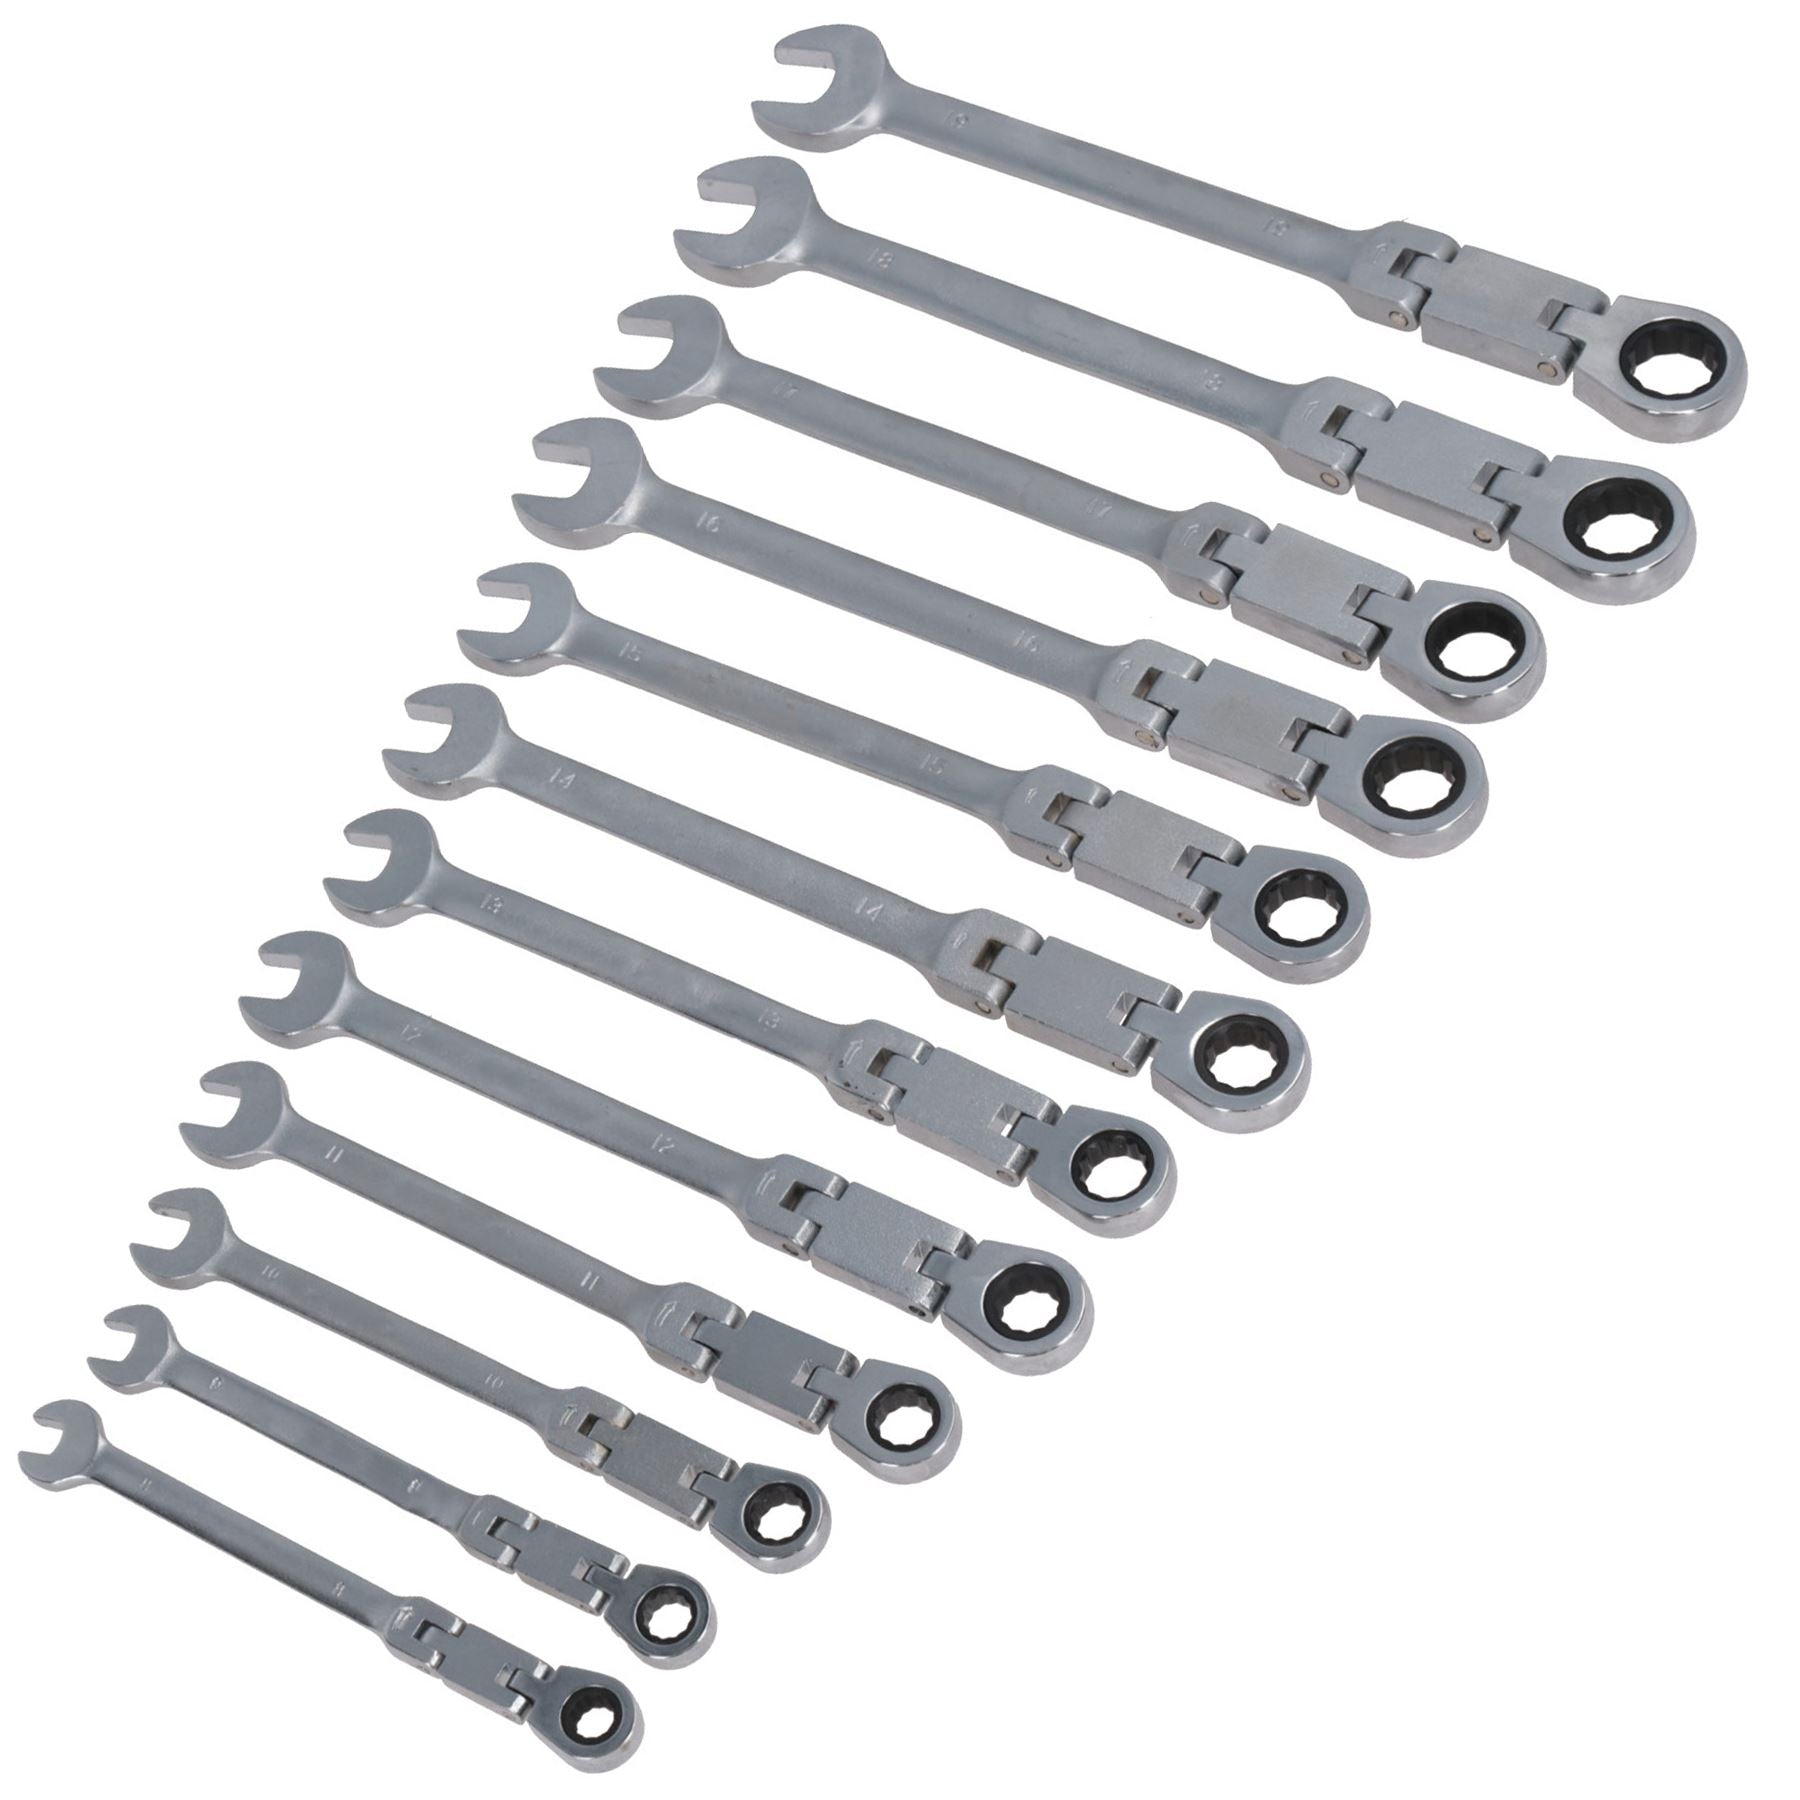 Metric Double Jointed Flexi Ratchet Combination Spanner Wrench 72 Teeth